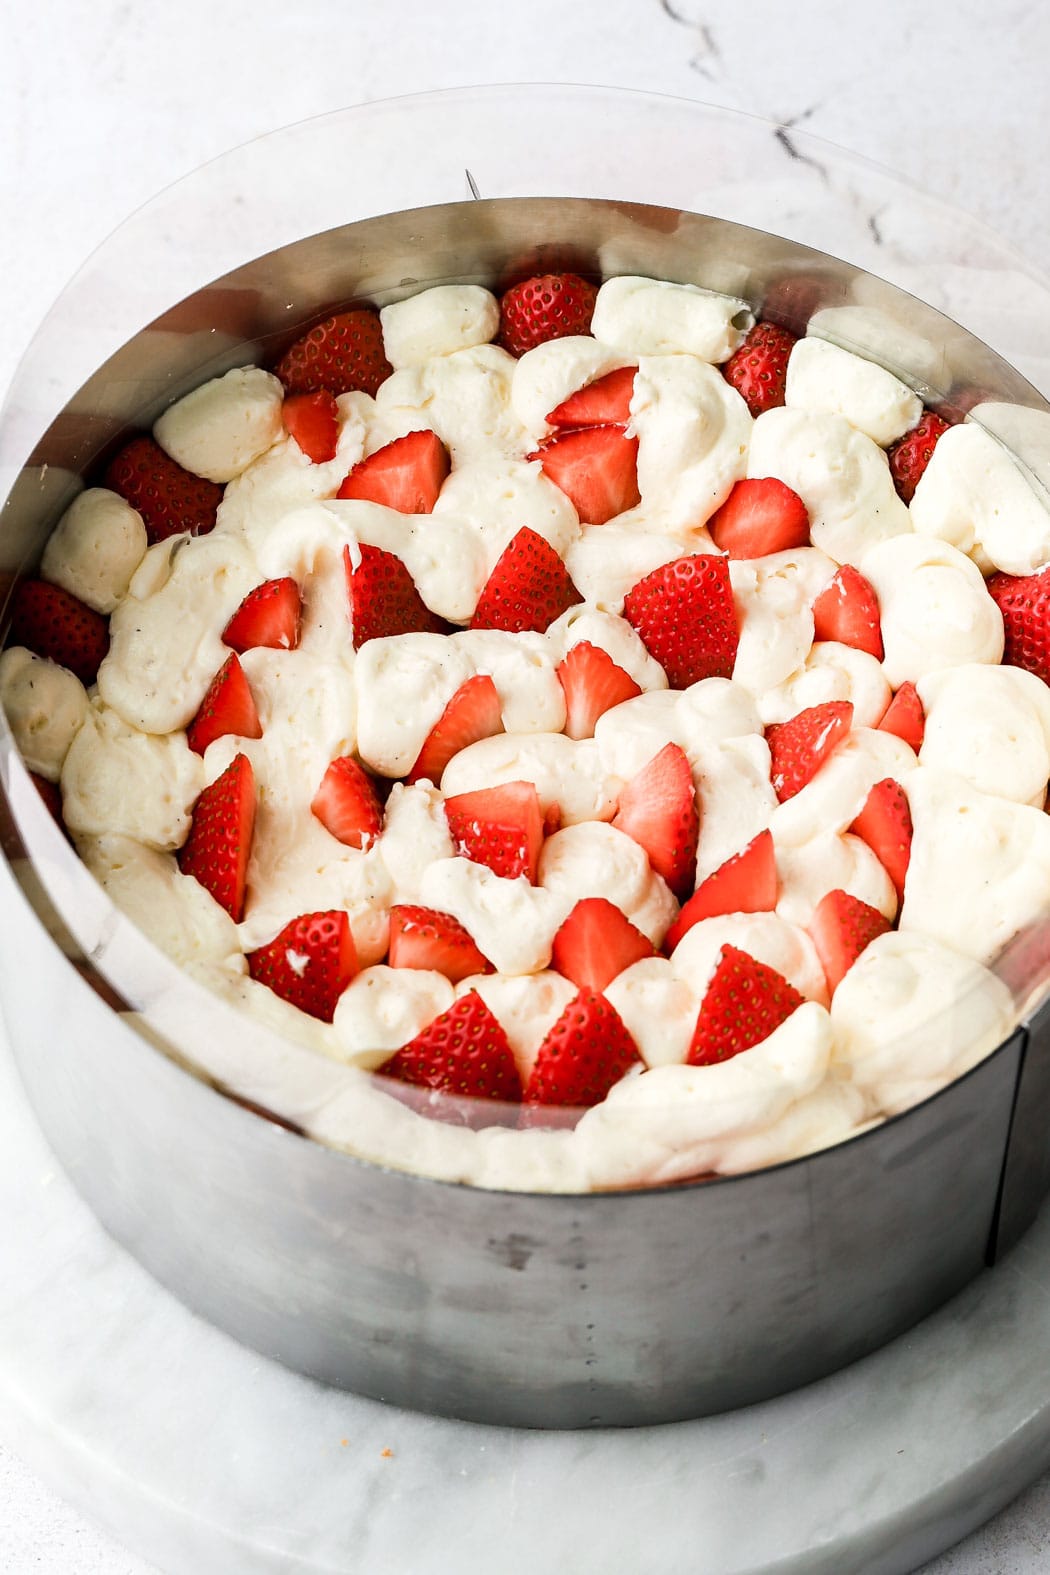 fill in the center with more strawberry slices and fill in empty spaces with cream